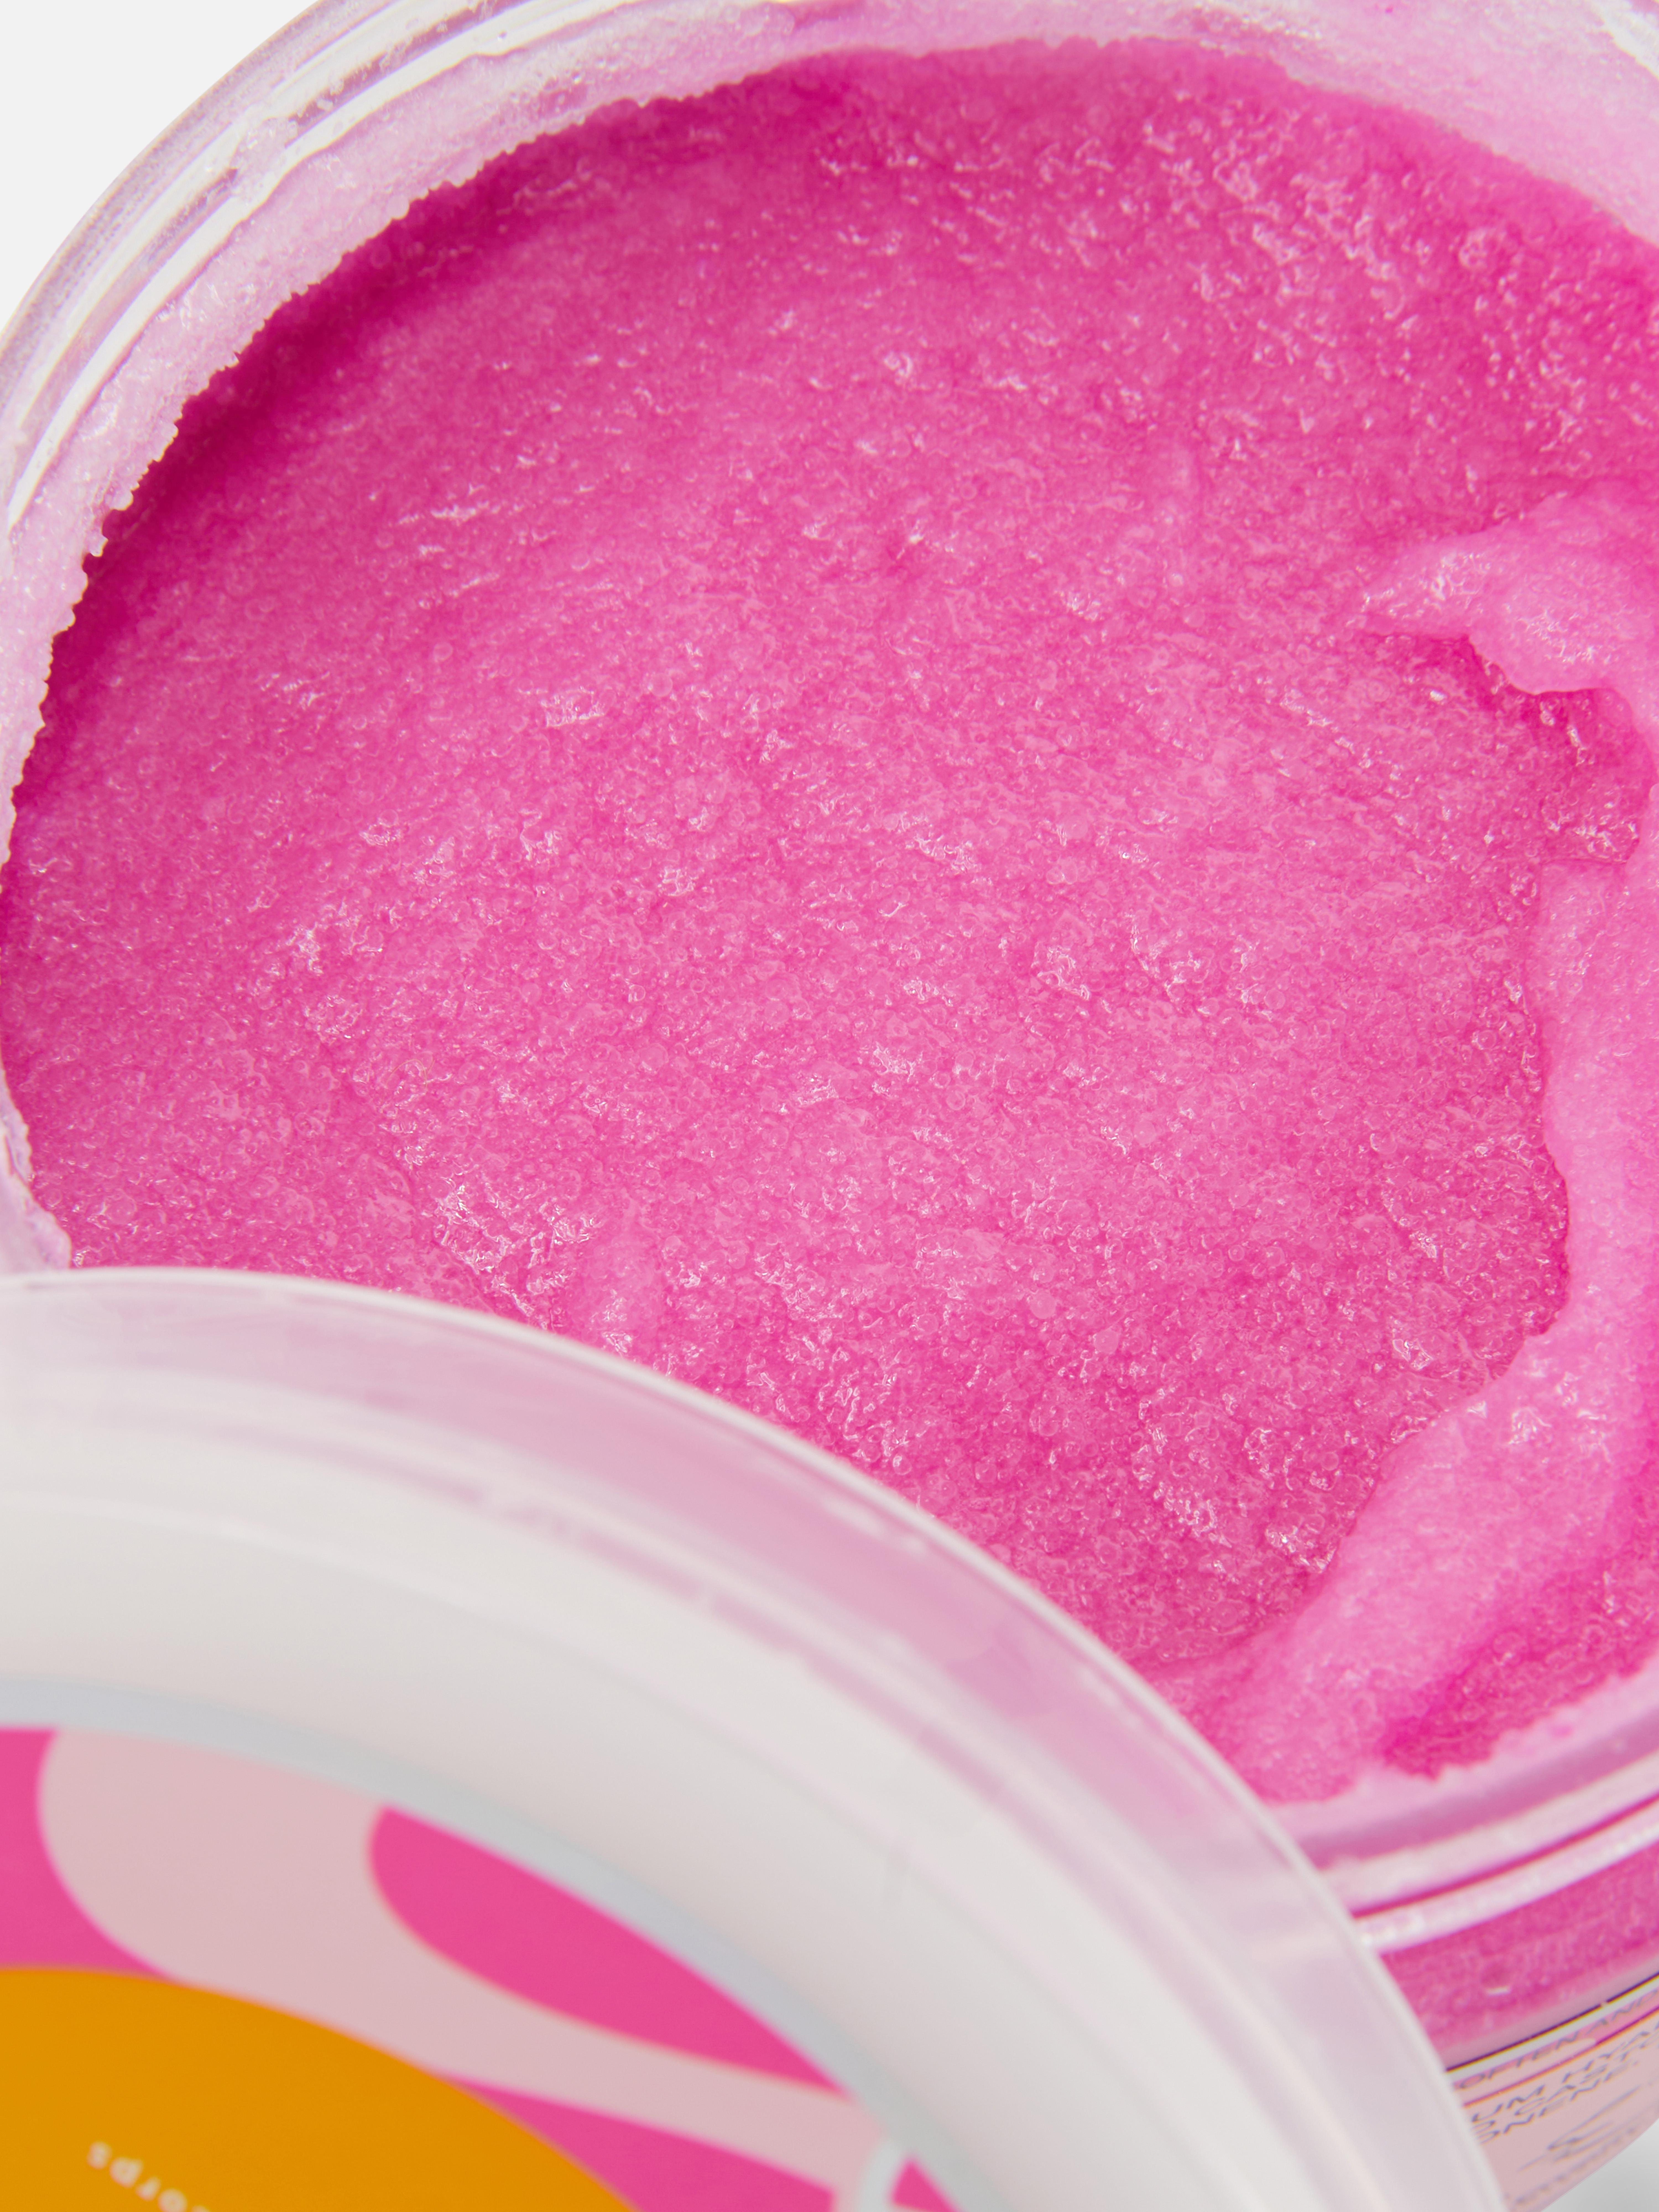 PS…Guava and Pink Grapefruit Body Scrub